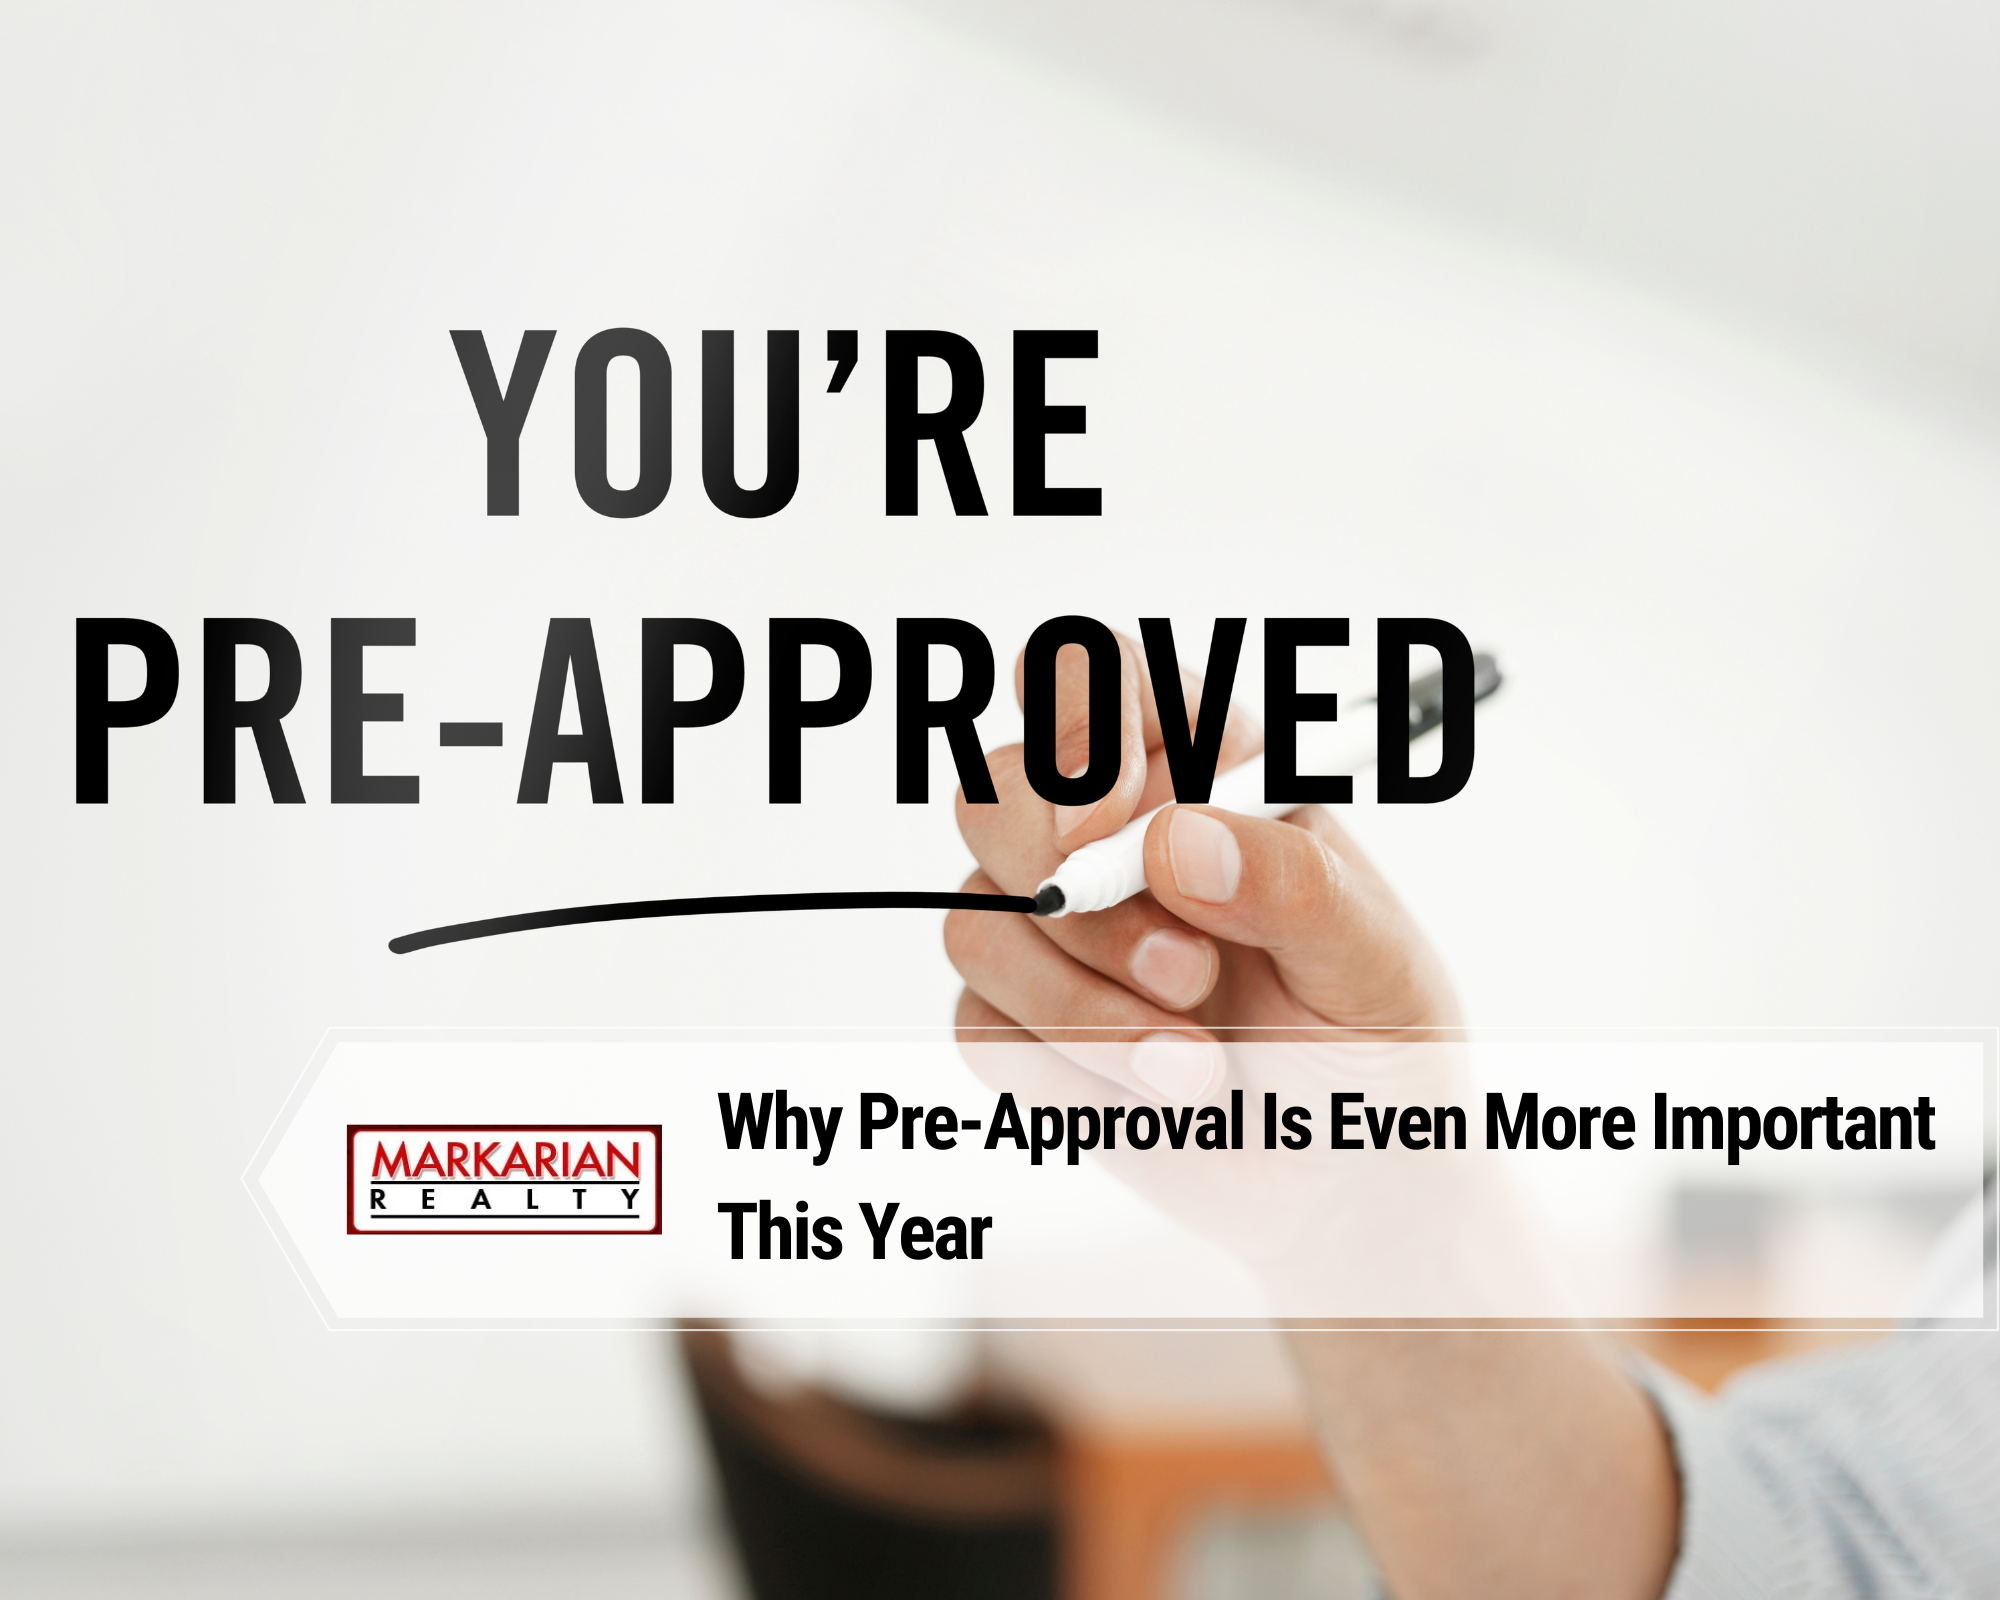 Why Pre-Approval Is Even More Important This Year